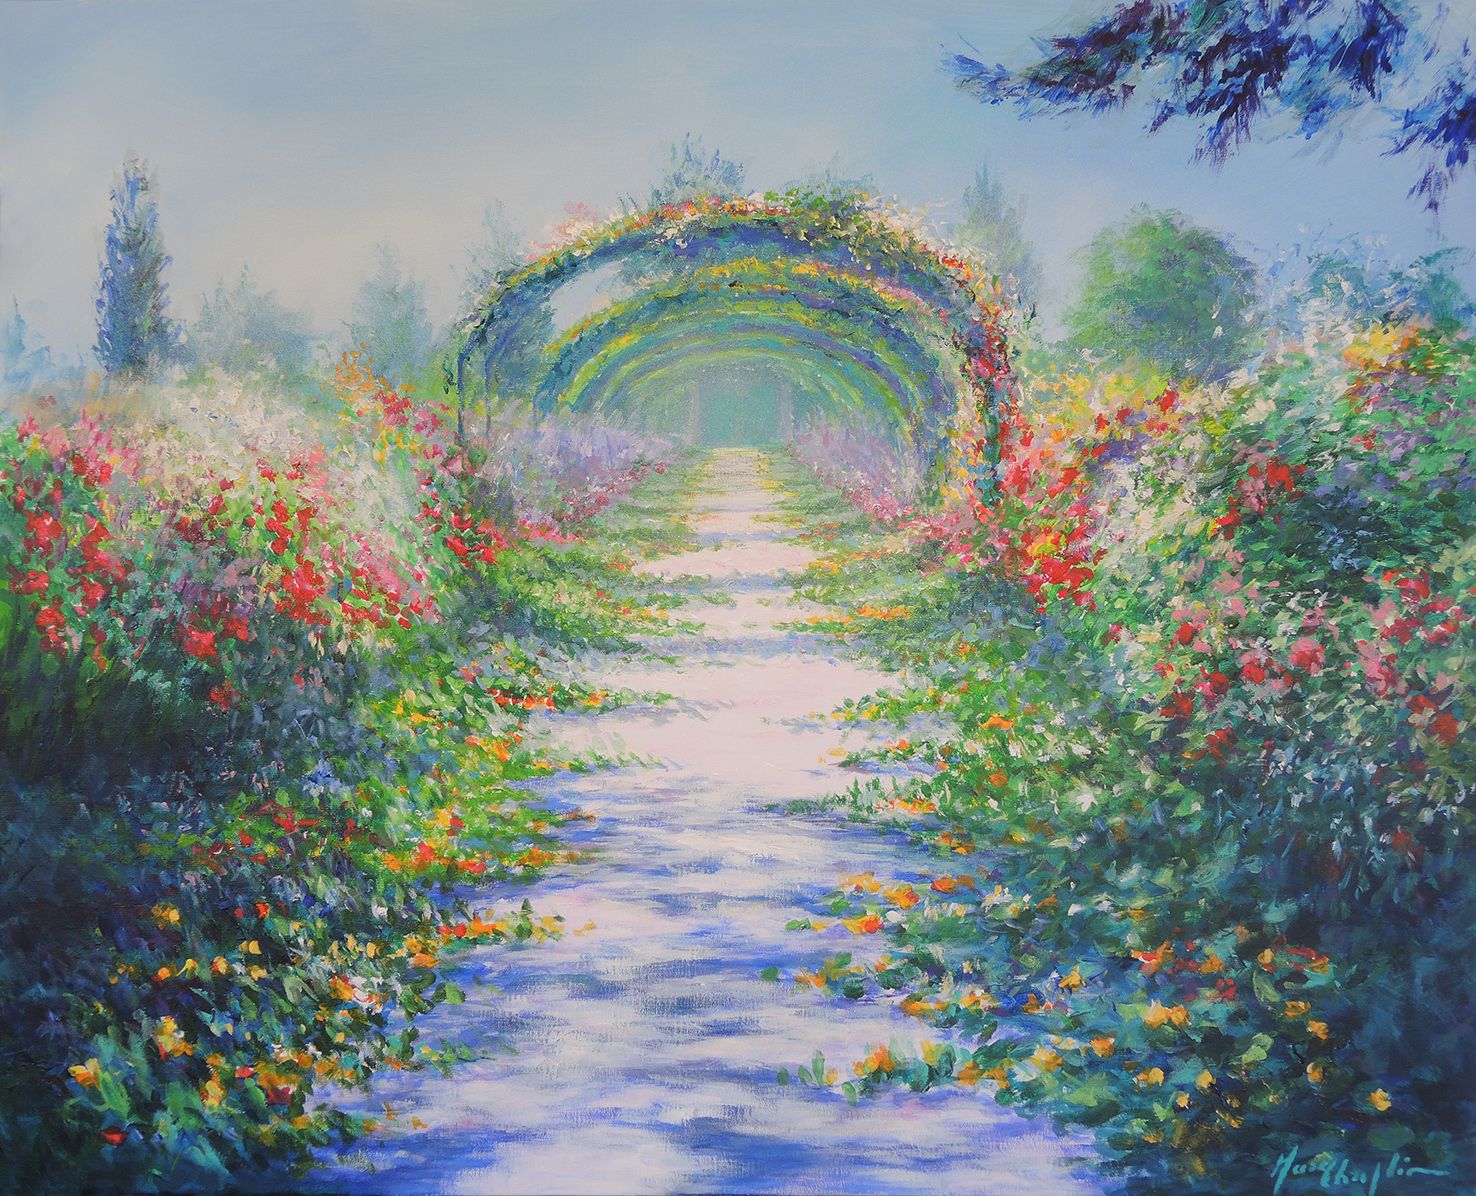 Along the nasturtium path in Monet's gardens in Giverny by Mary Chaplin